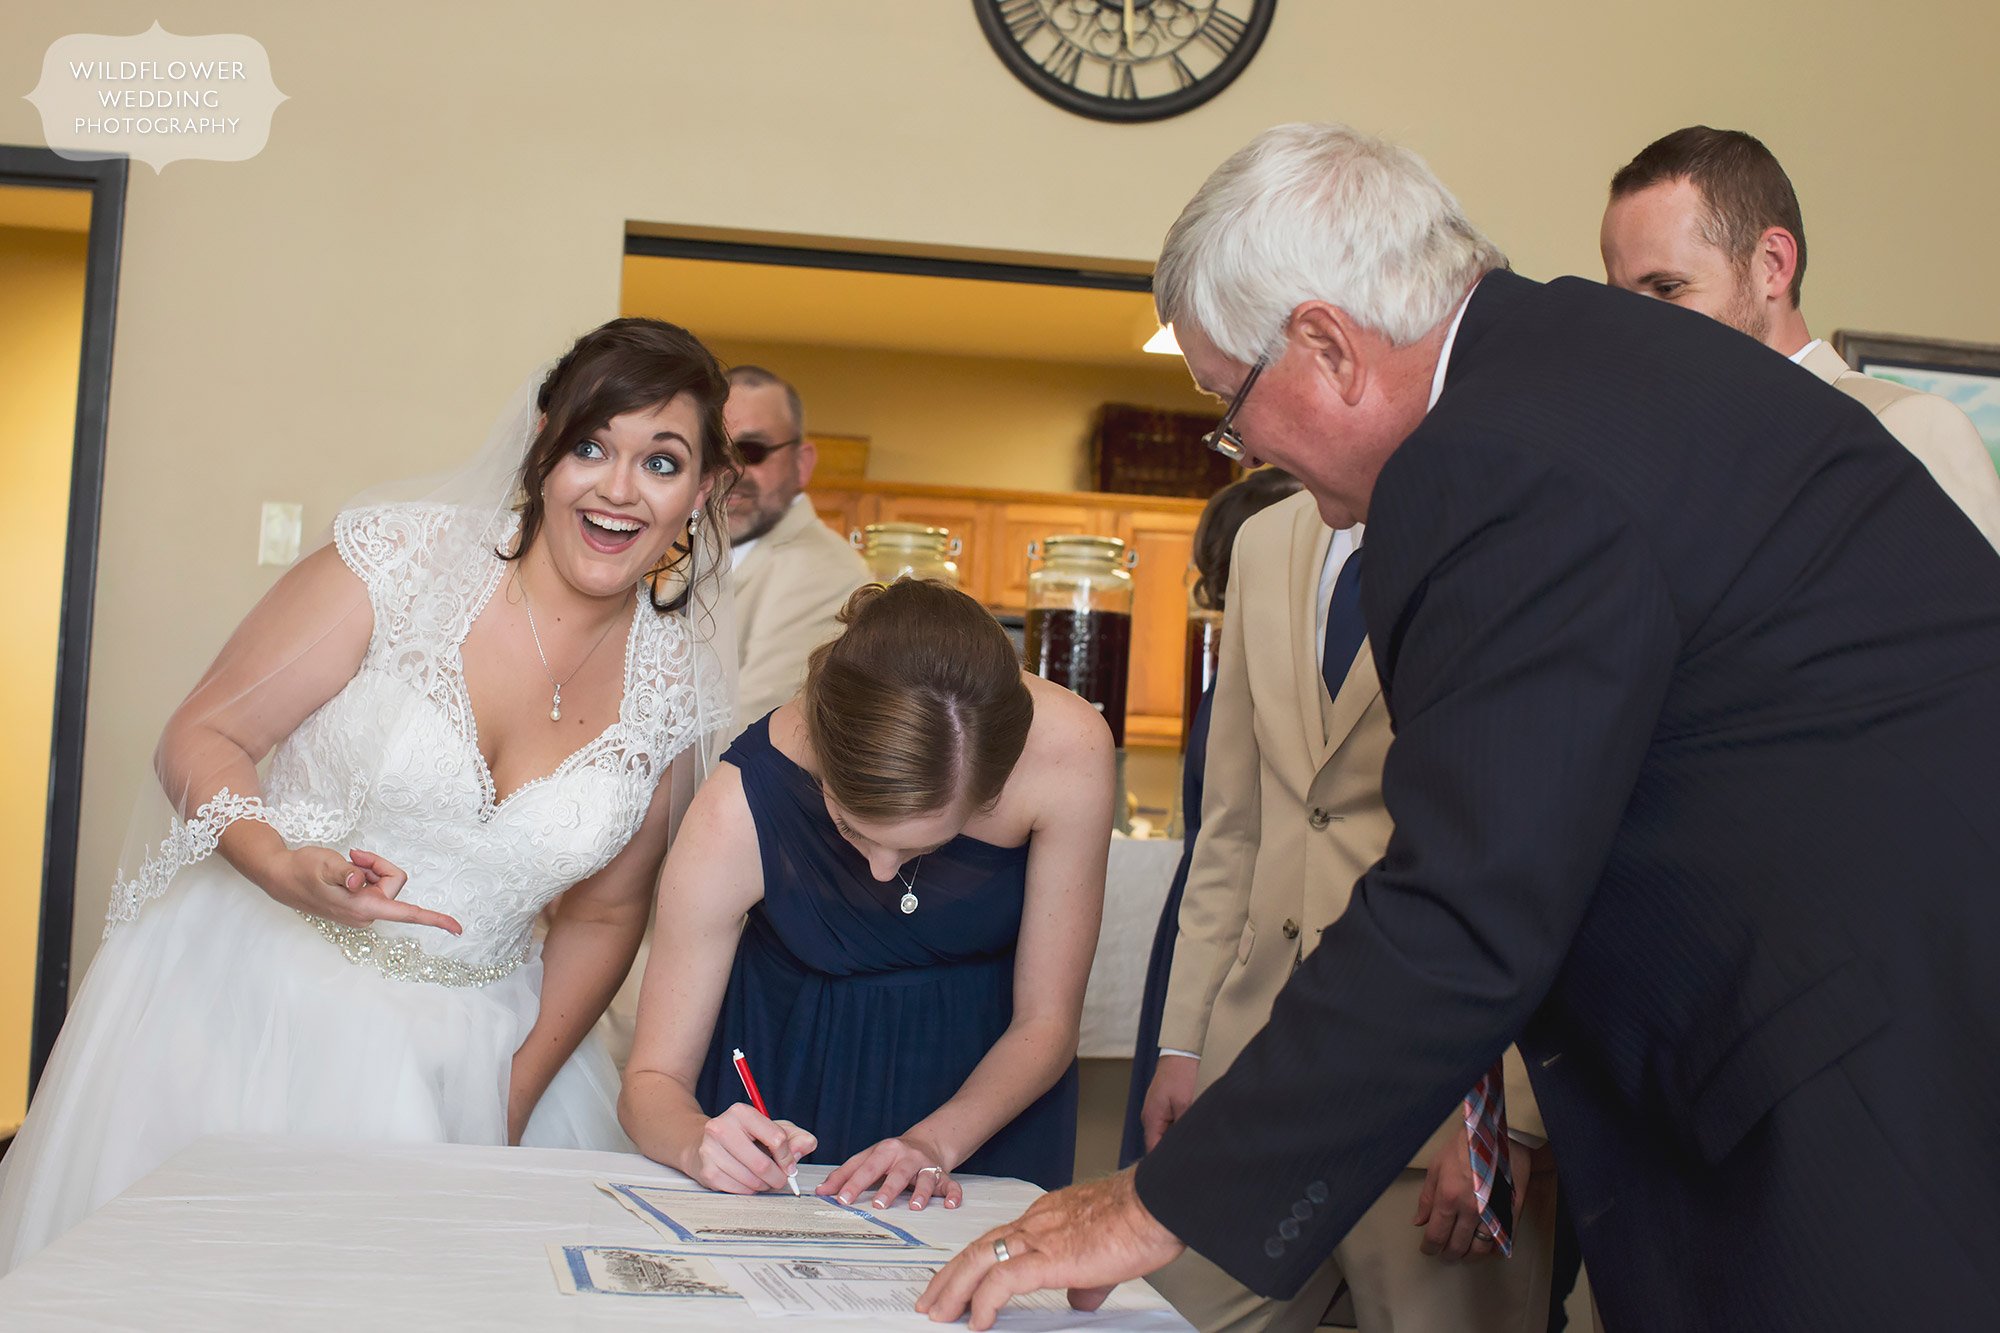 Candid wedding photo of the bride signing wedding certificate after country wedding.